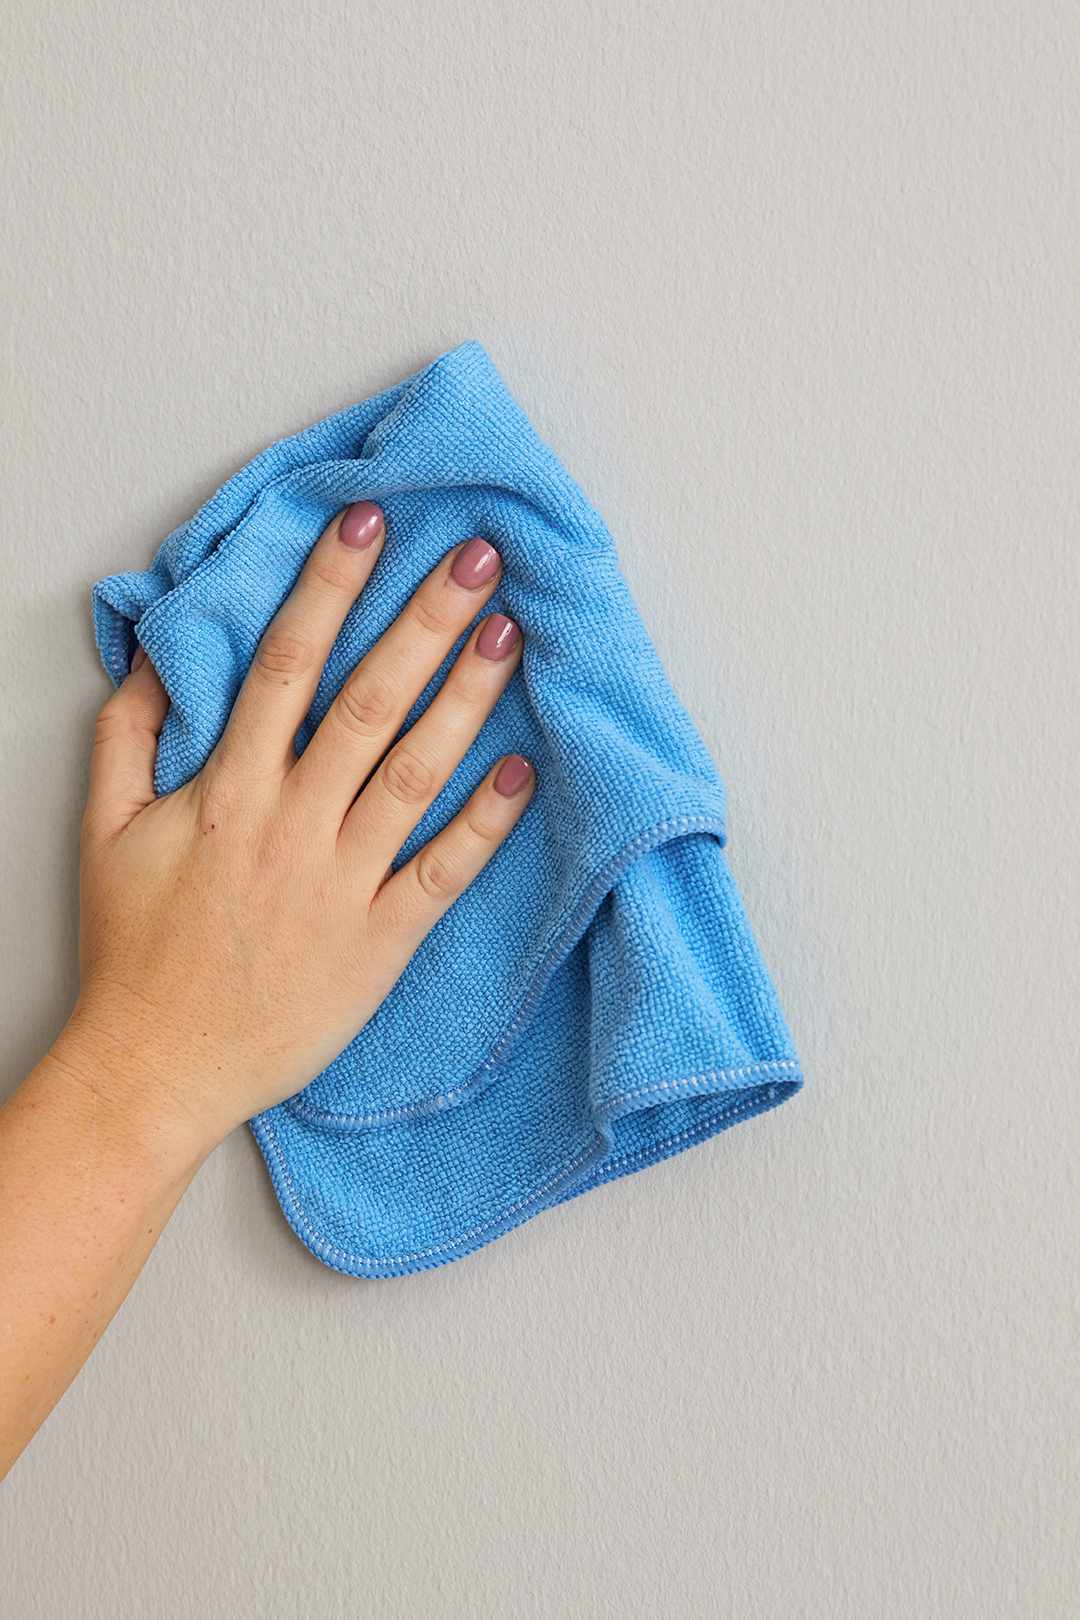 cleaning wall with blue cloth